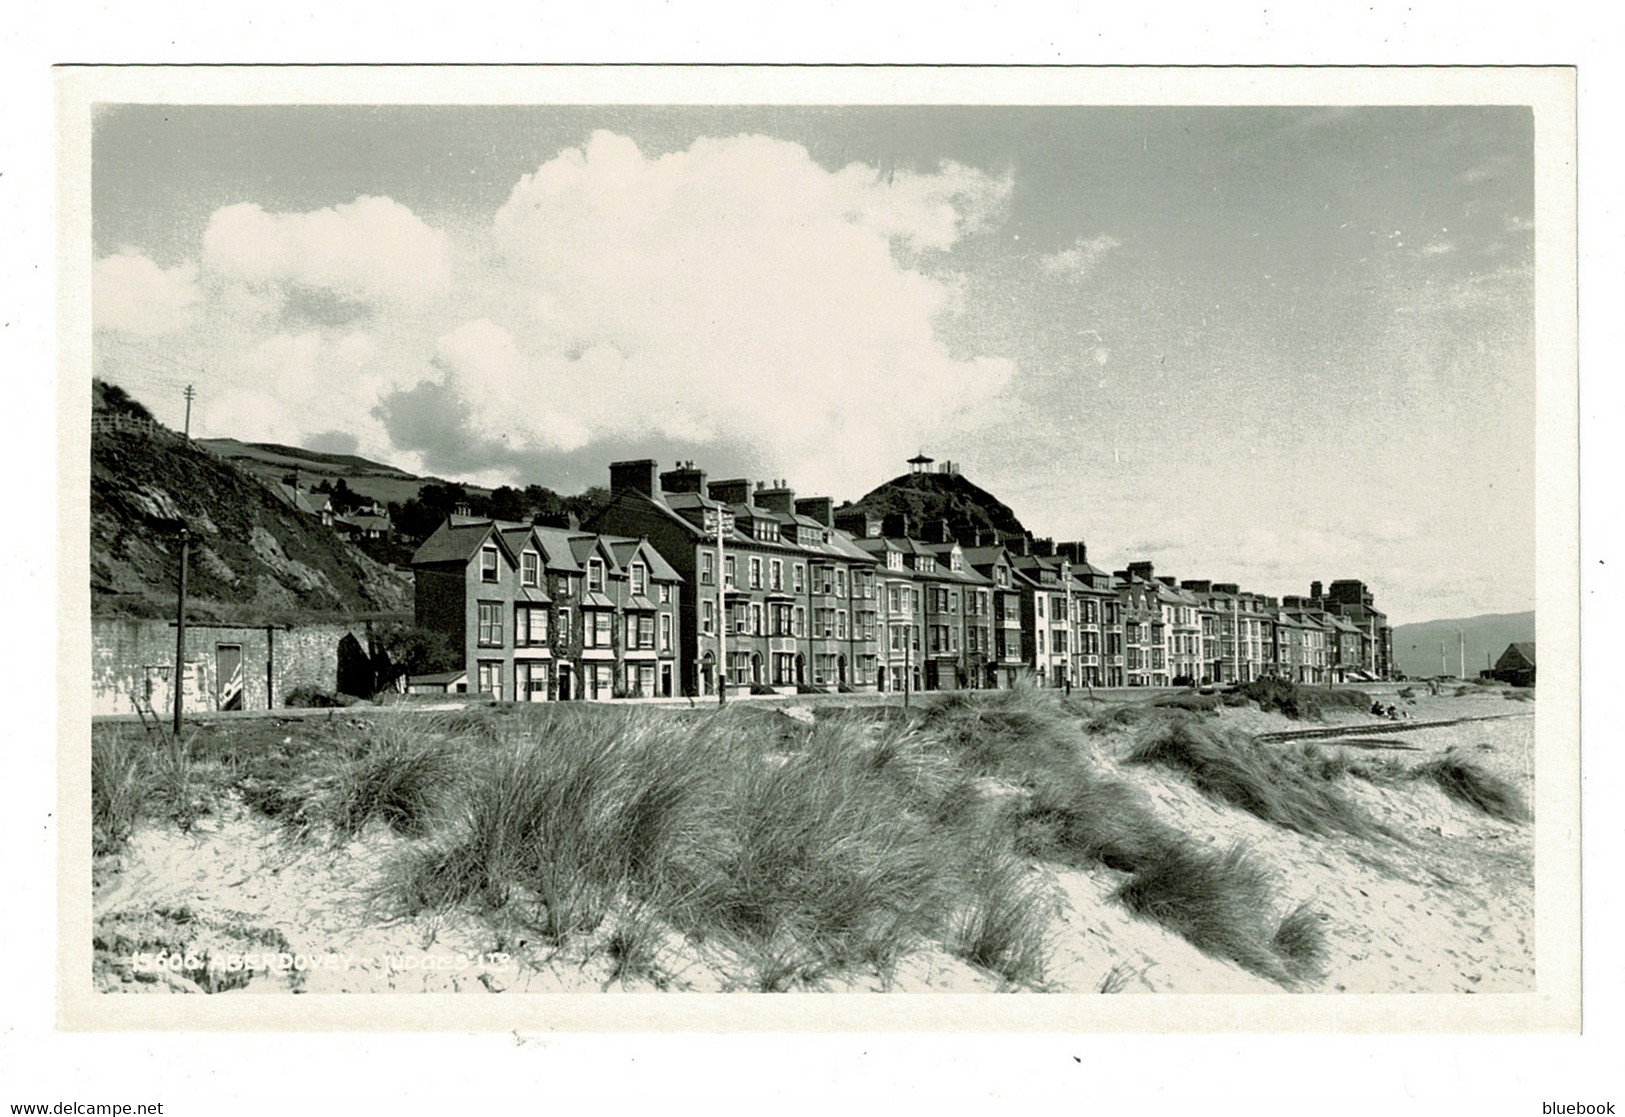 Ref 1473 - Judges Real Photo Postcard - Houses & Sand Dunes Aberdovey Merionethshire Wales - Merionethshire